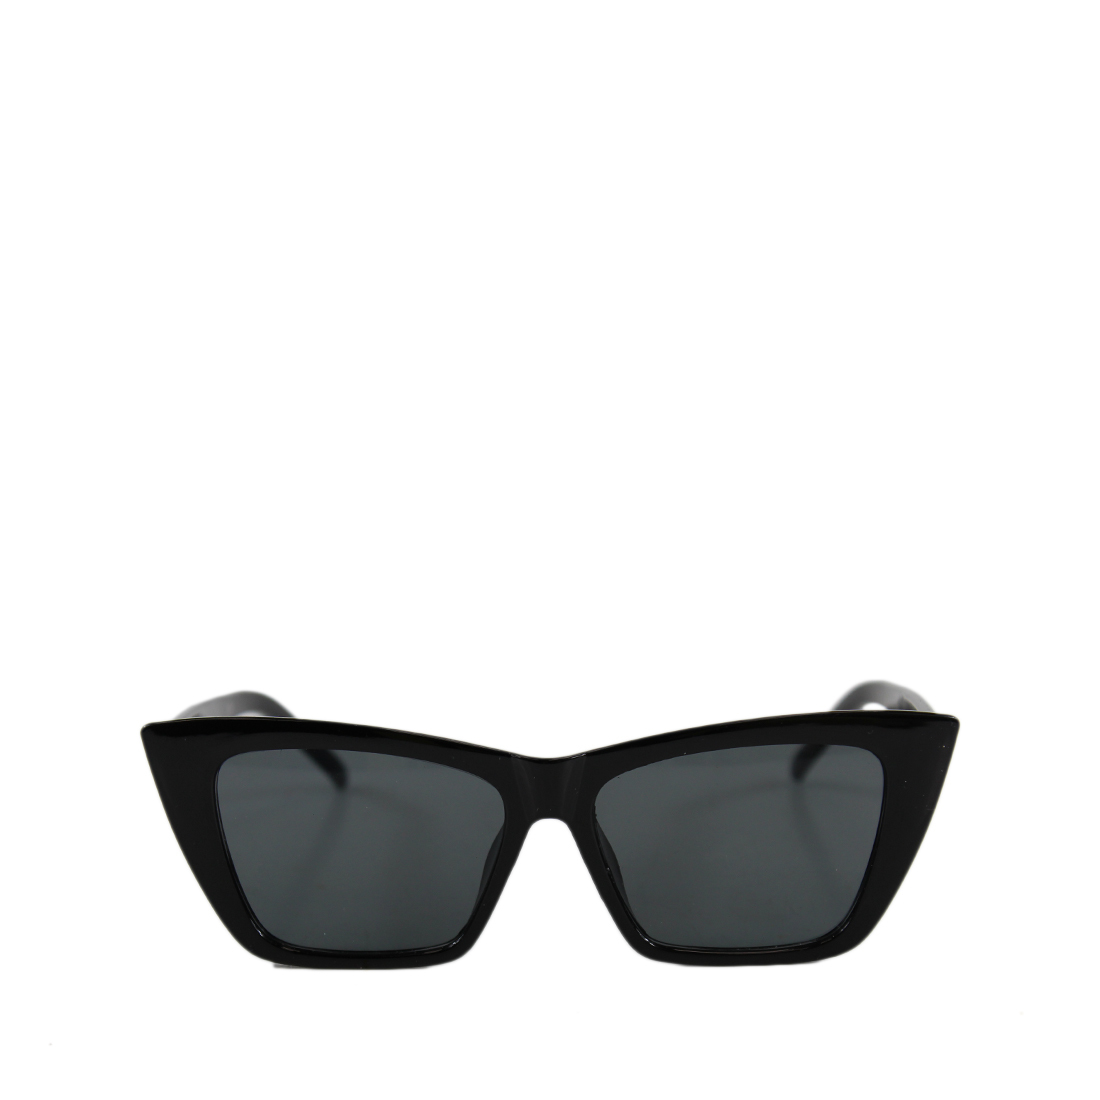 * Angled square cat eye sunglasses with